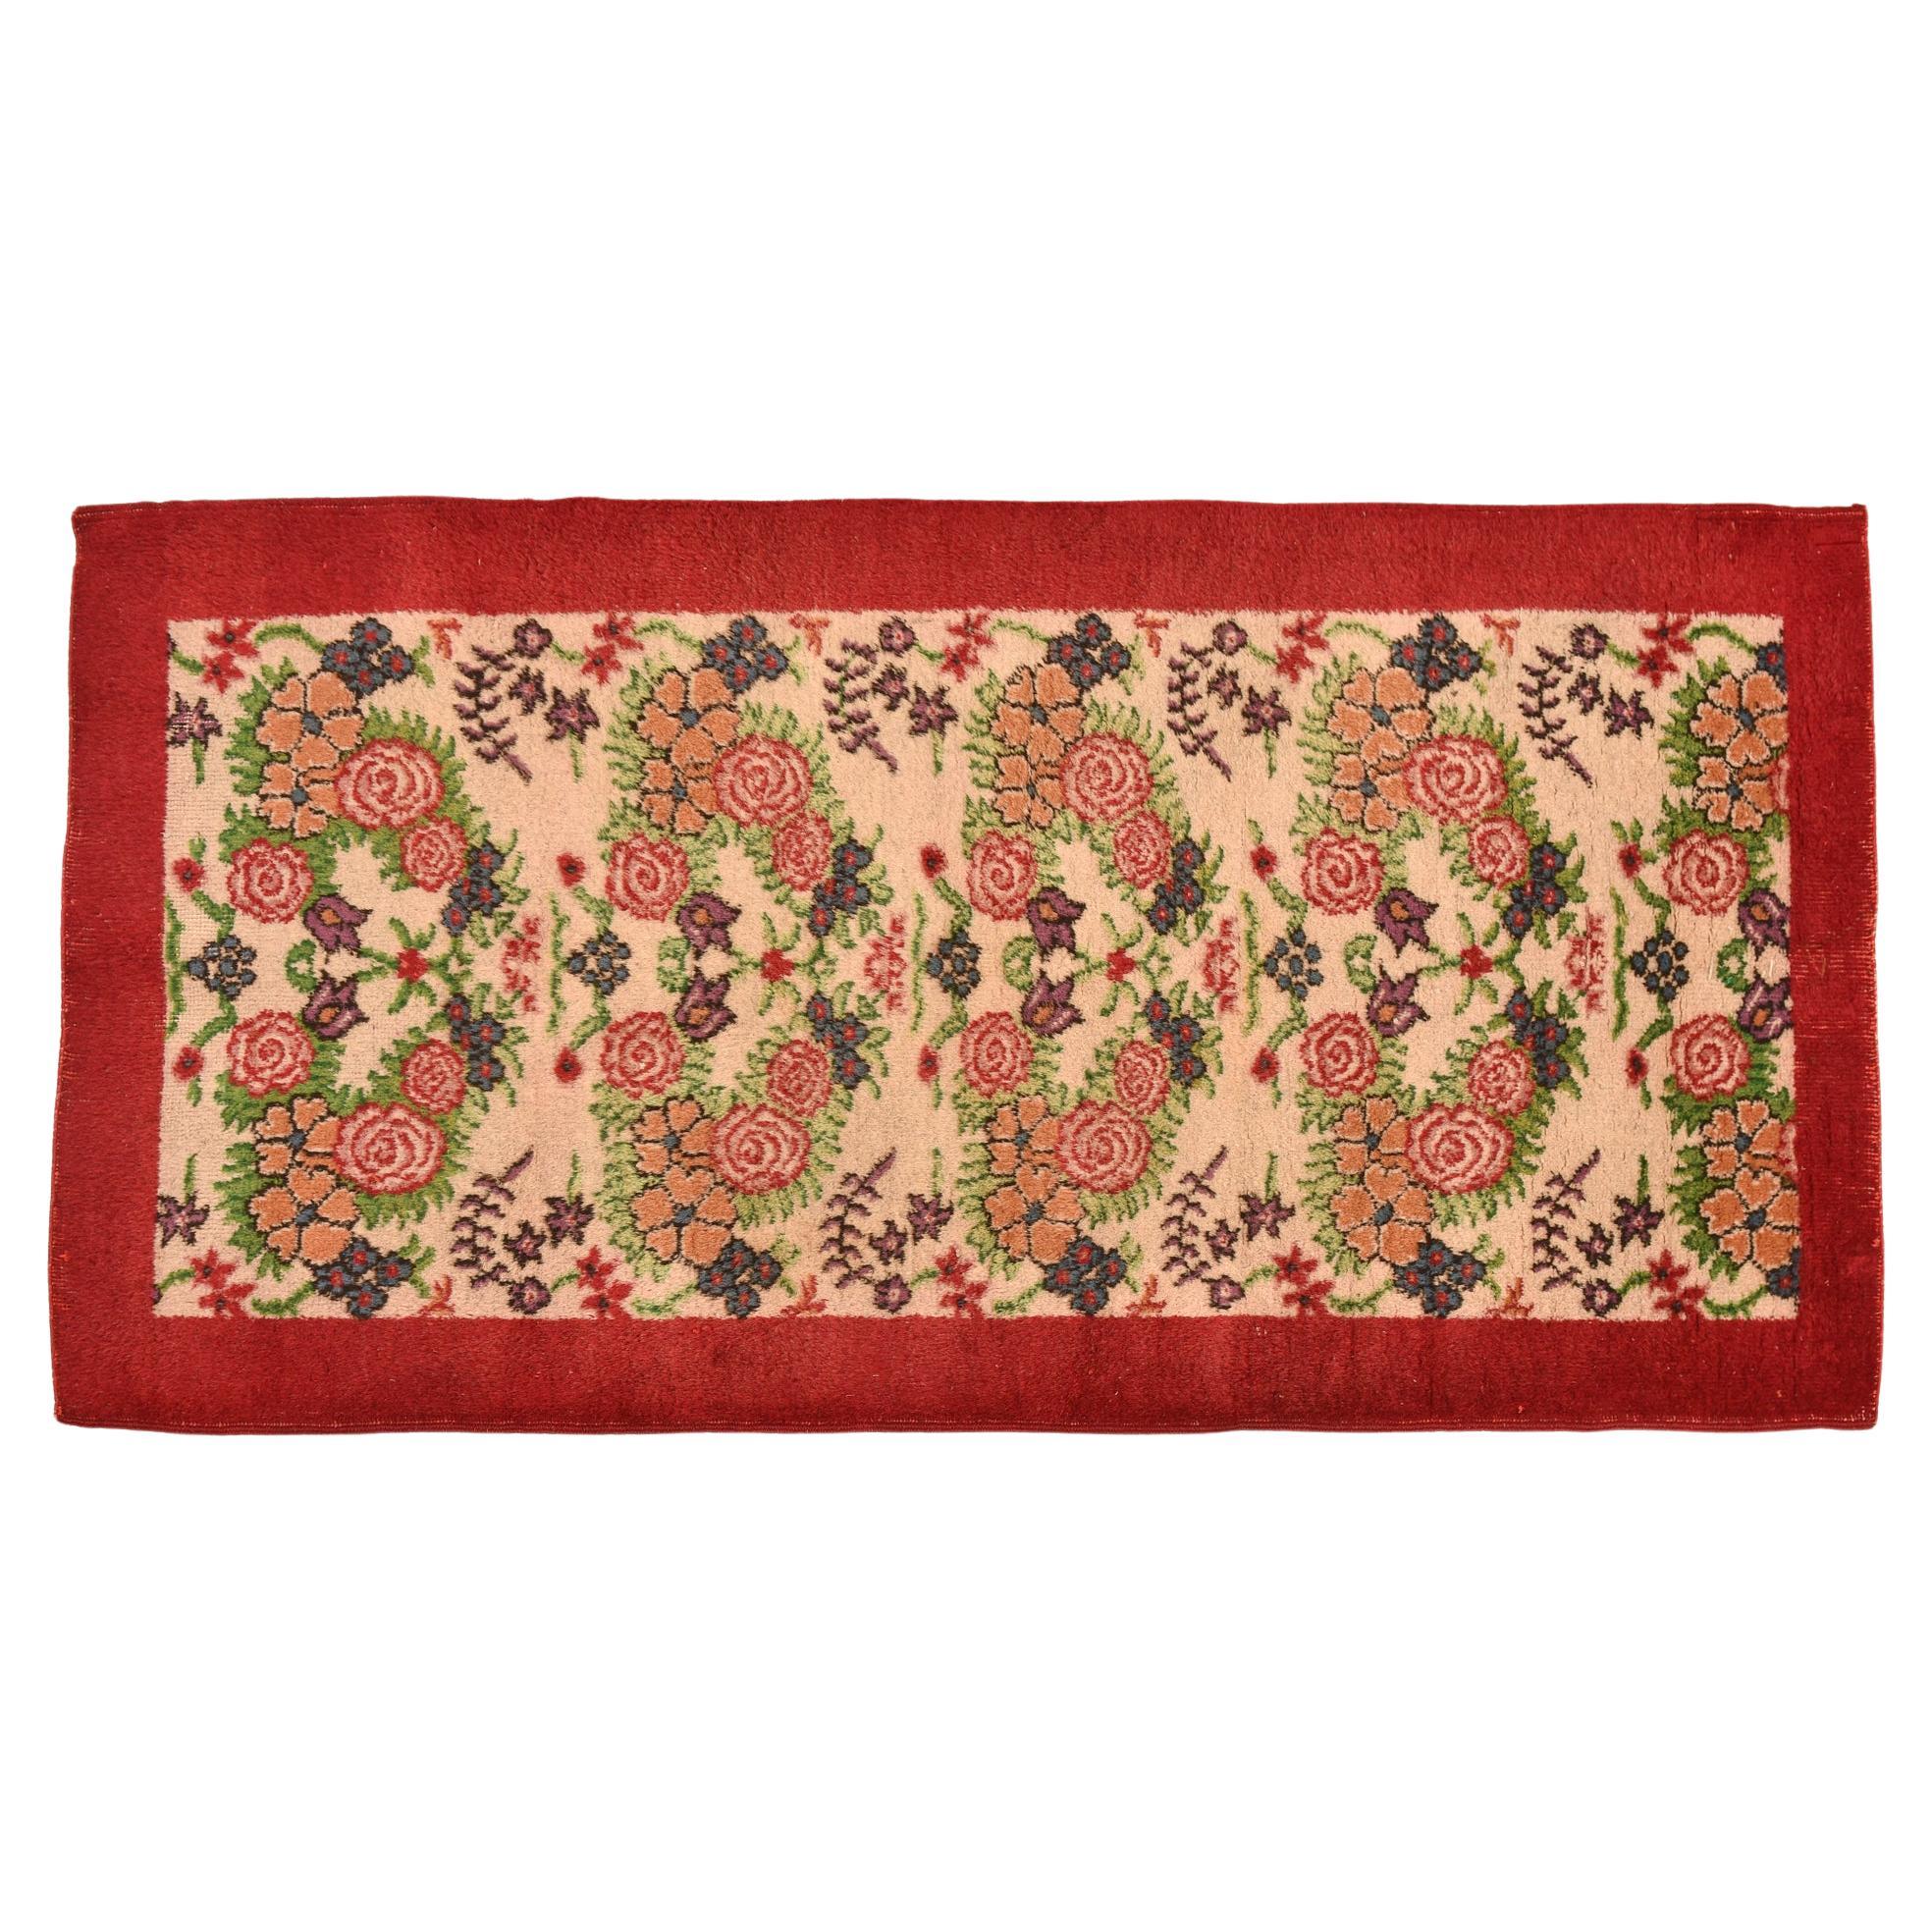 Isparta Carpet with Bunches of Flowers For Sale